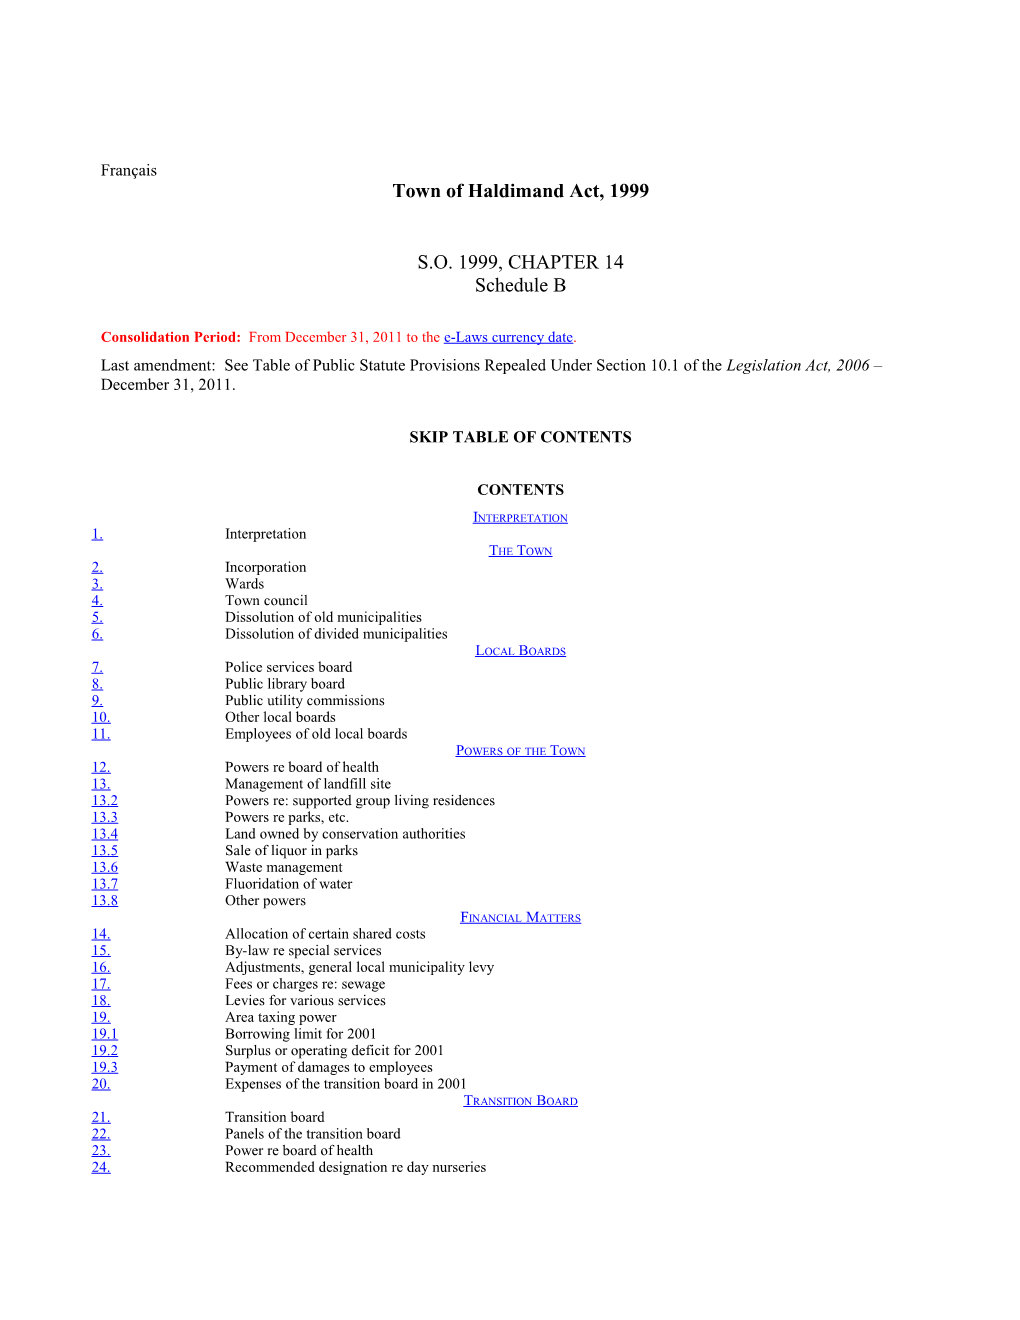 Town of Haldimand Act, 1999, S.O. 1999, C. 14, Sched. B